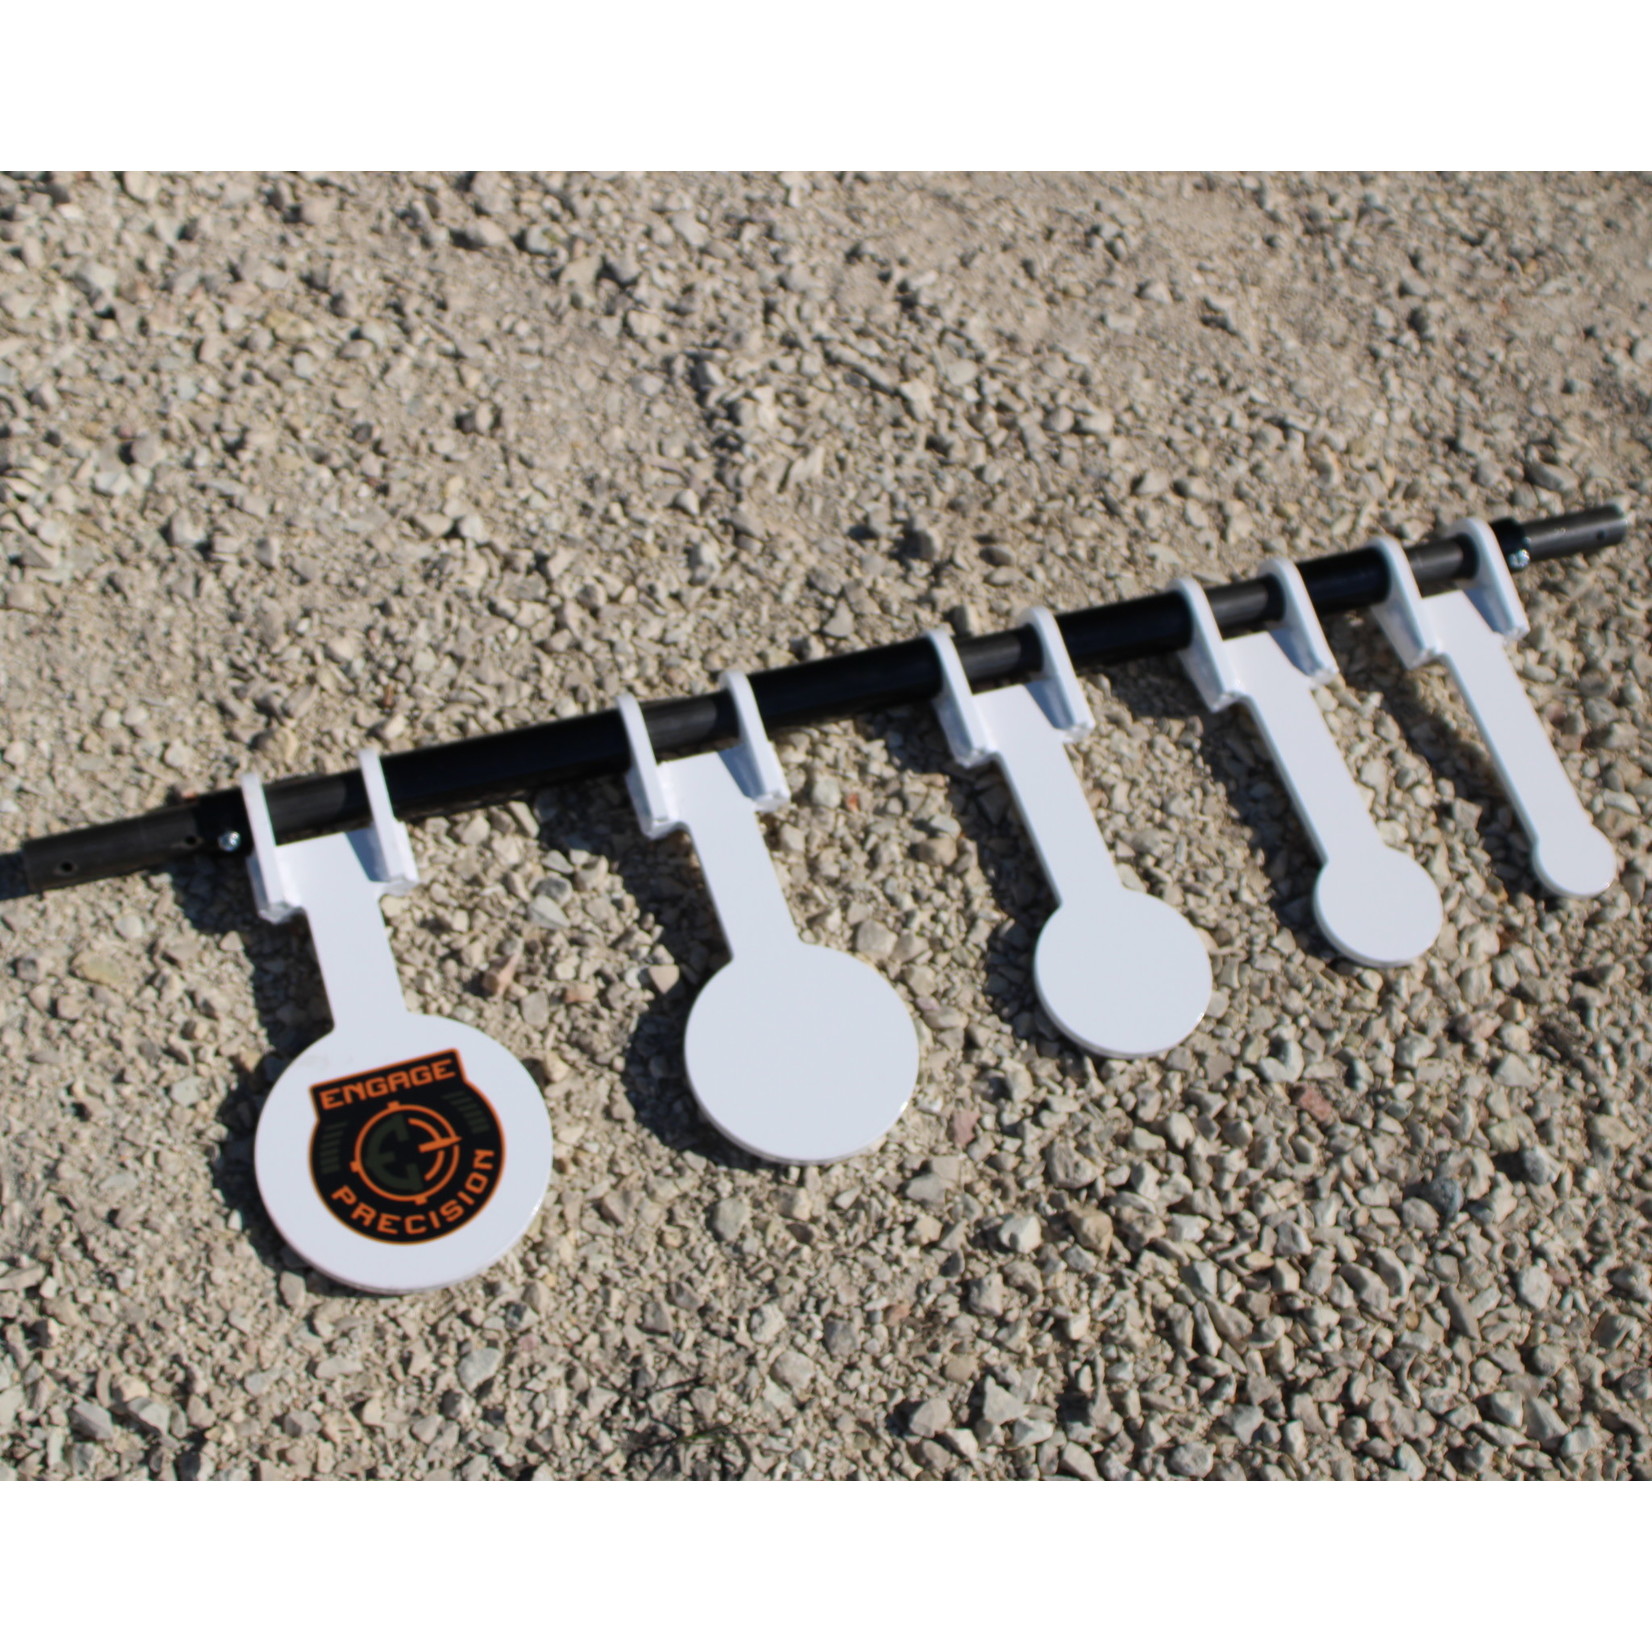 ENGAGE PRECISION ENGAGE PRECISION AR500 STEEL REACTIVE KYL RIFLE TARGET SET, 3/8", W/ 5 TARGETS, 2" - 6", WHITE